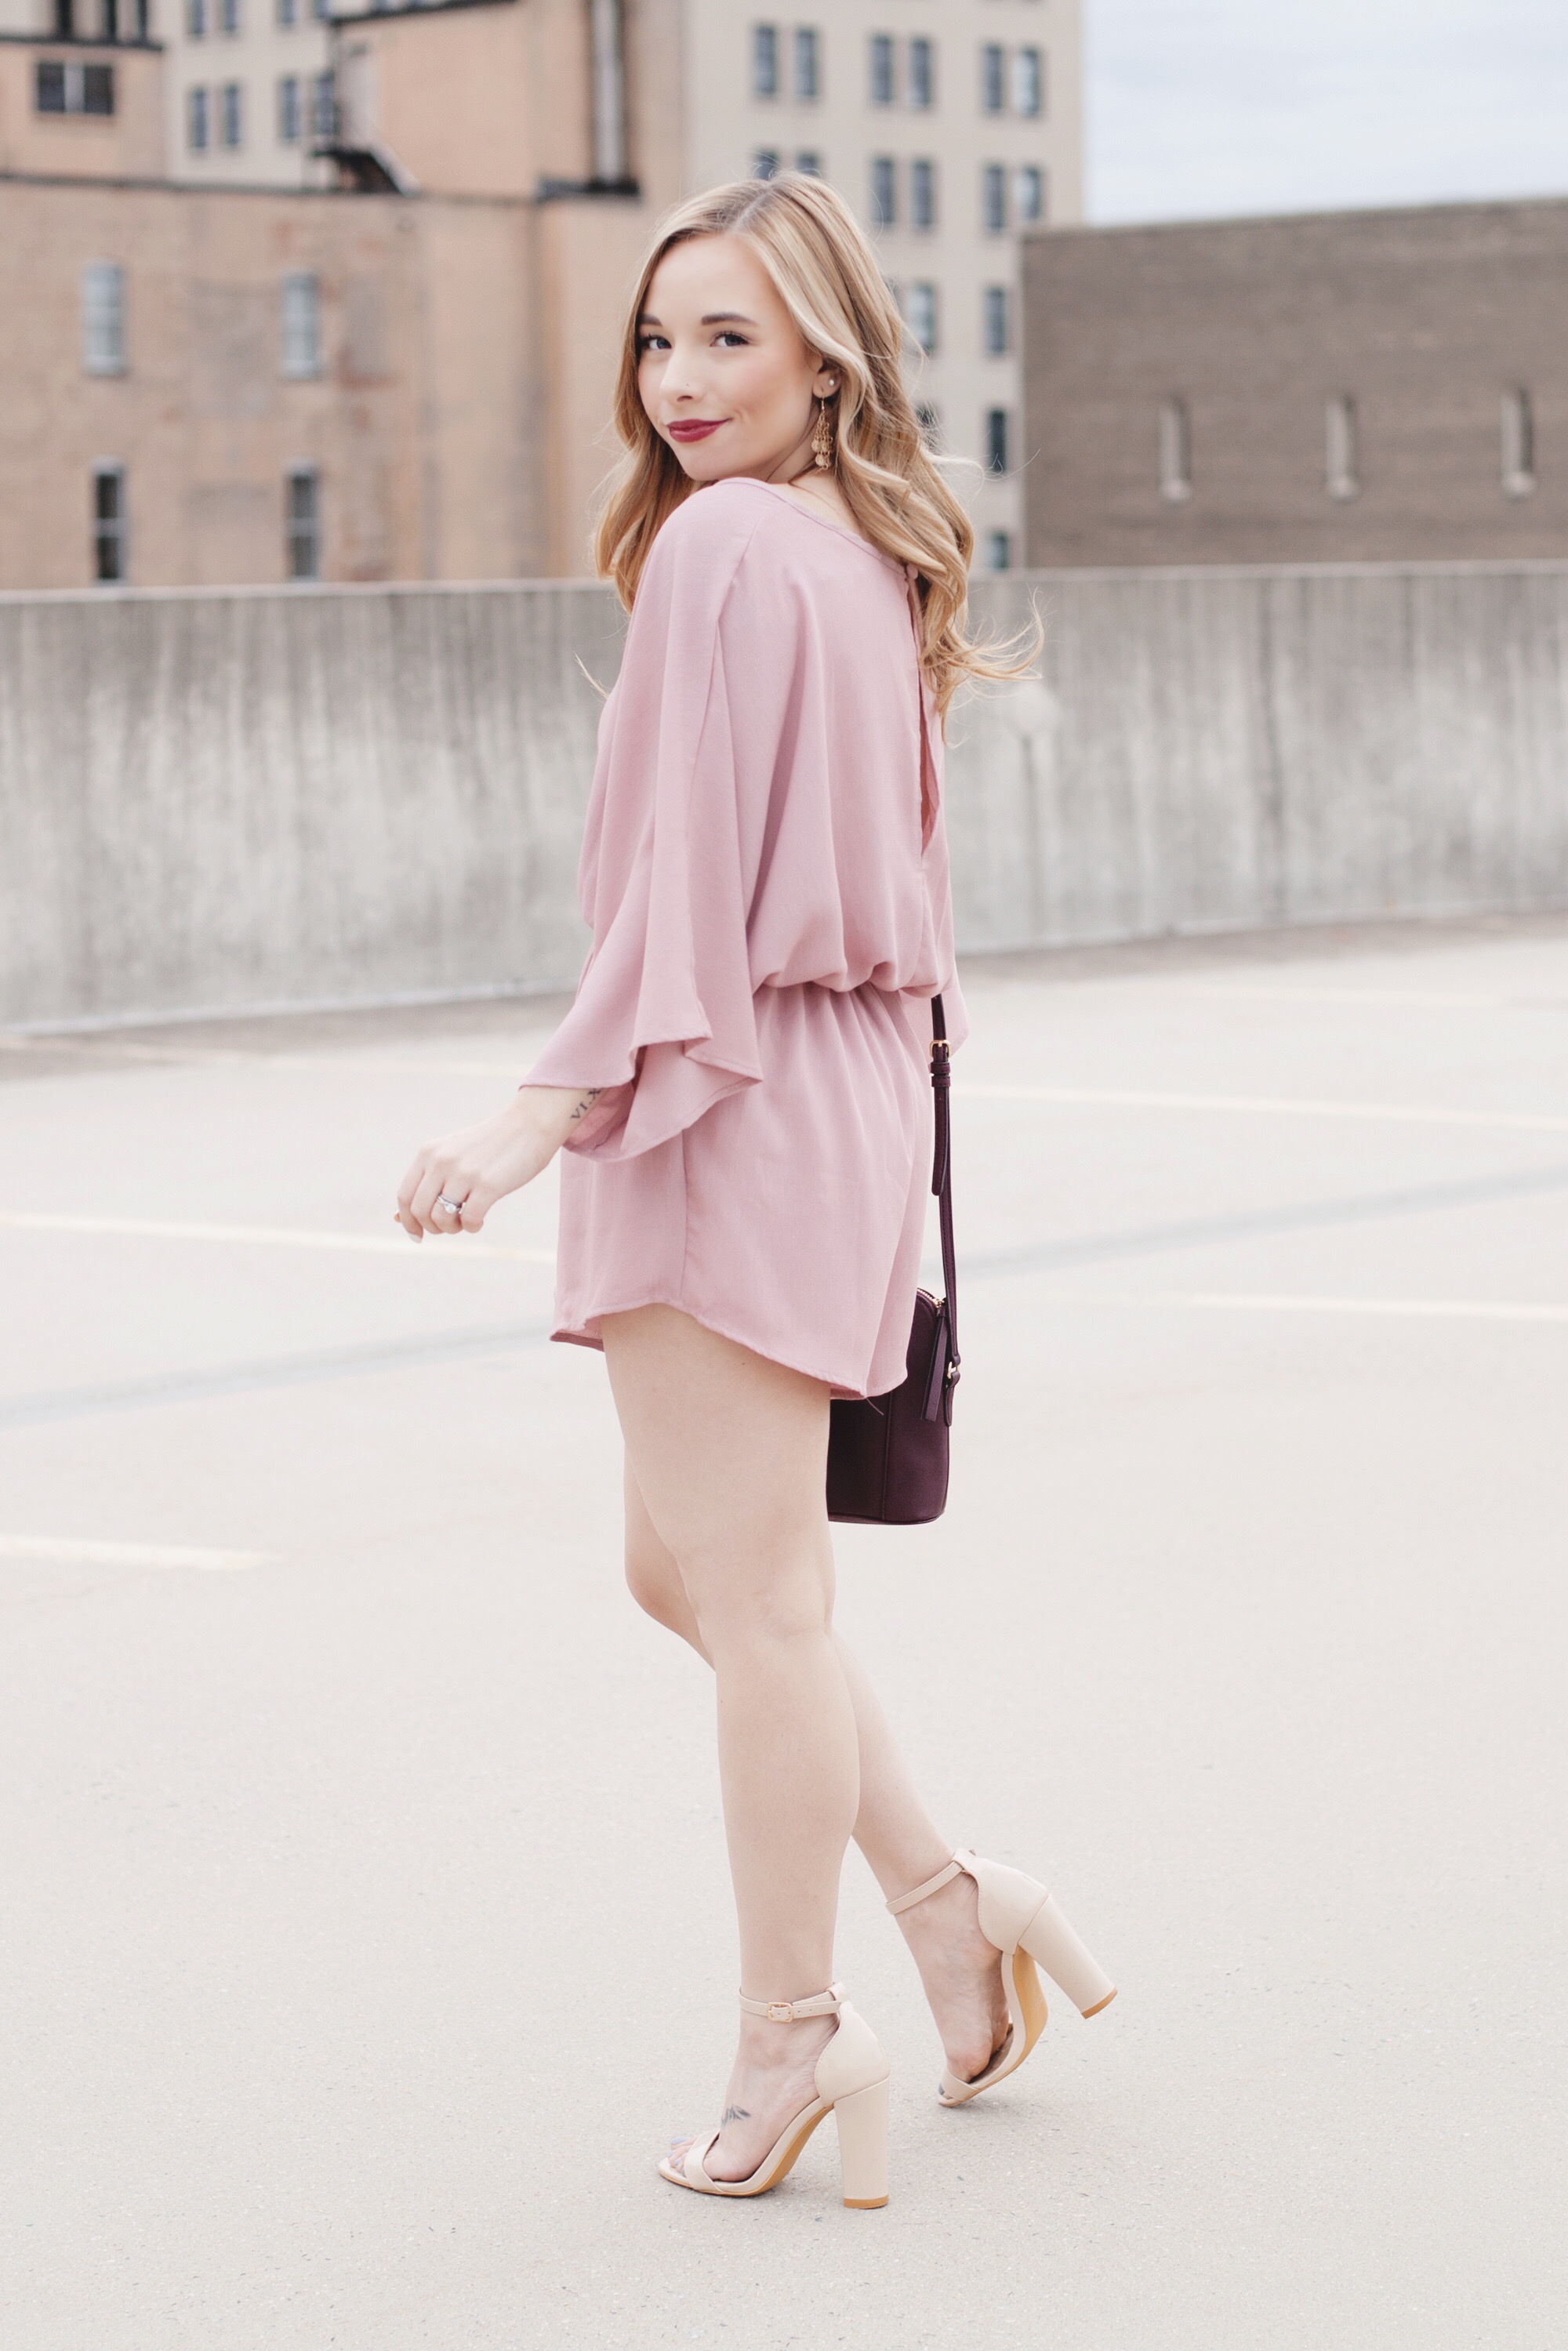 Mauve Romper From The Cheeky Lemon